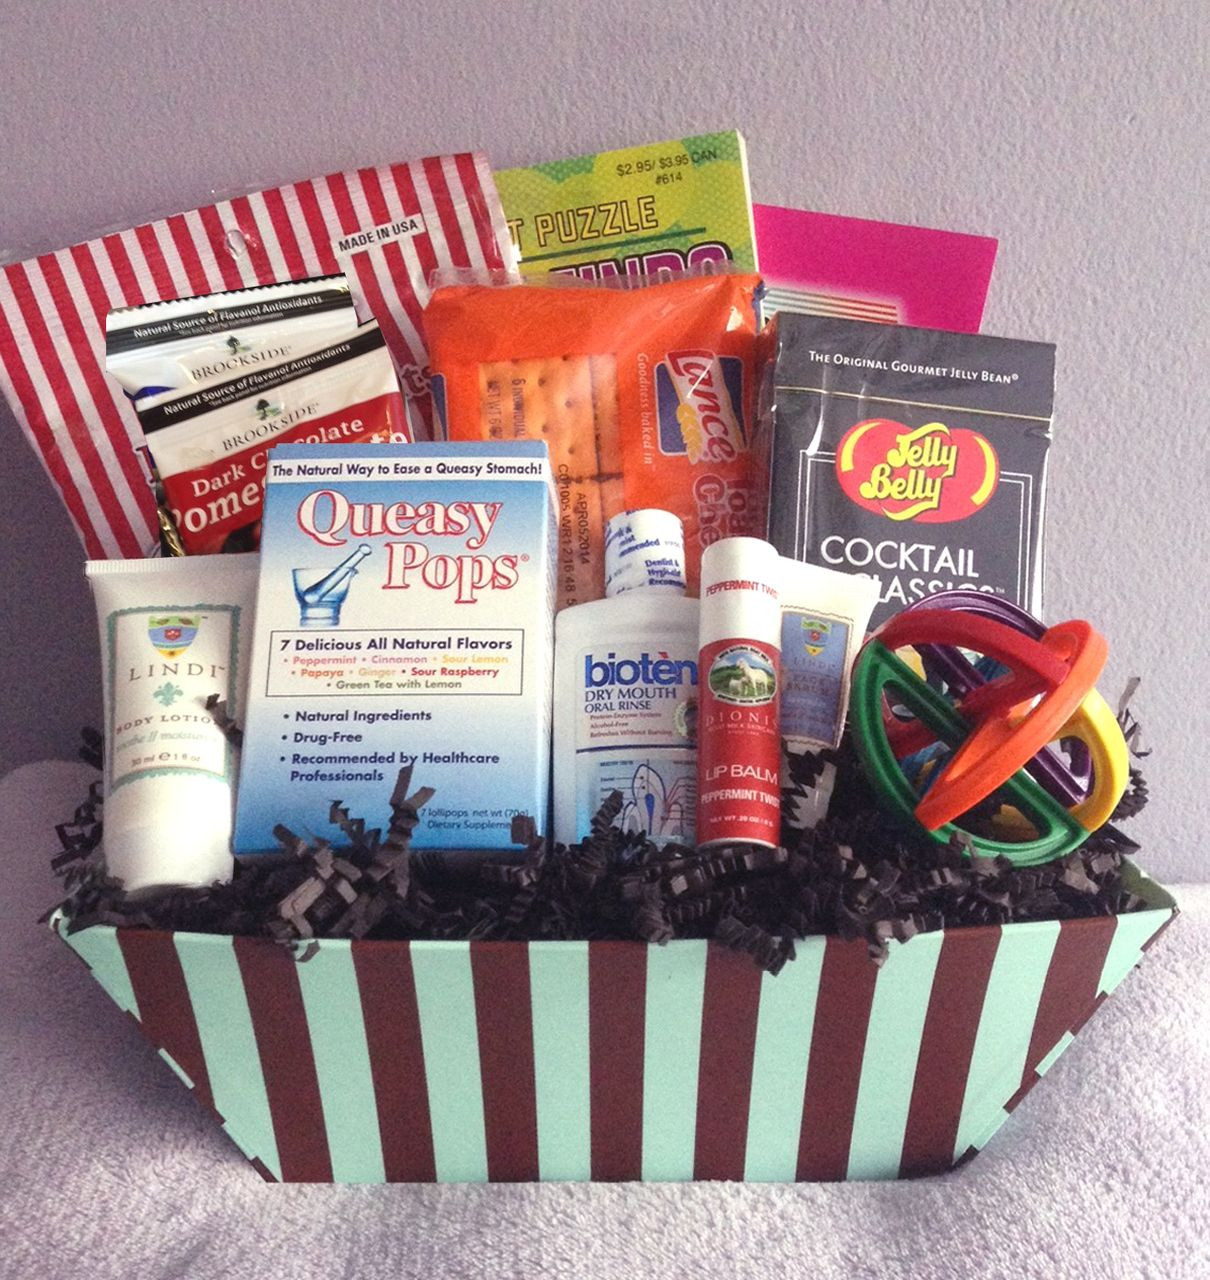 Gift Basket Ideas For Cancer Patients
 Men s Small Chemo Basket